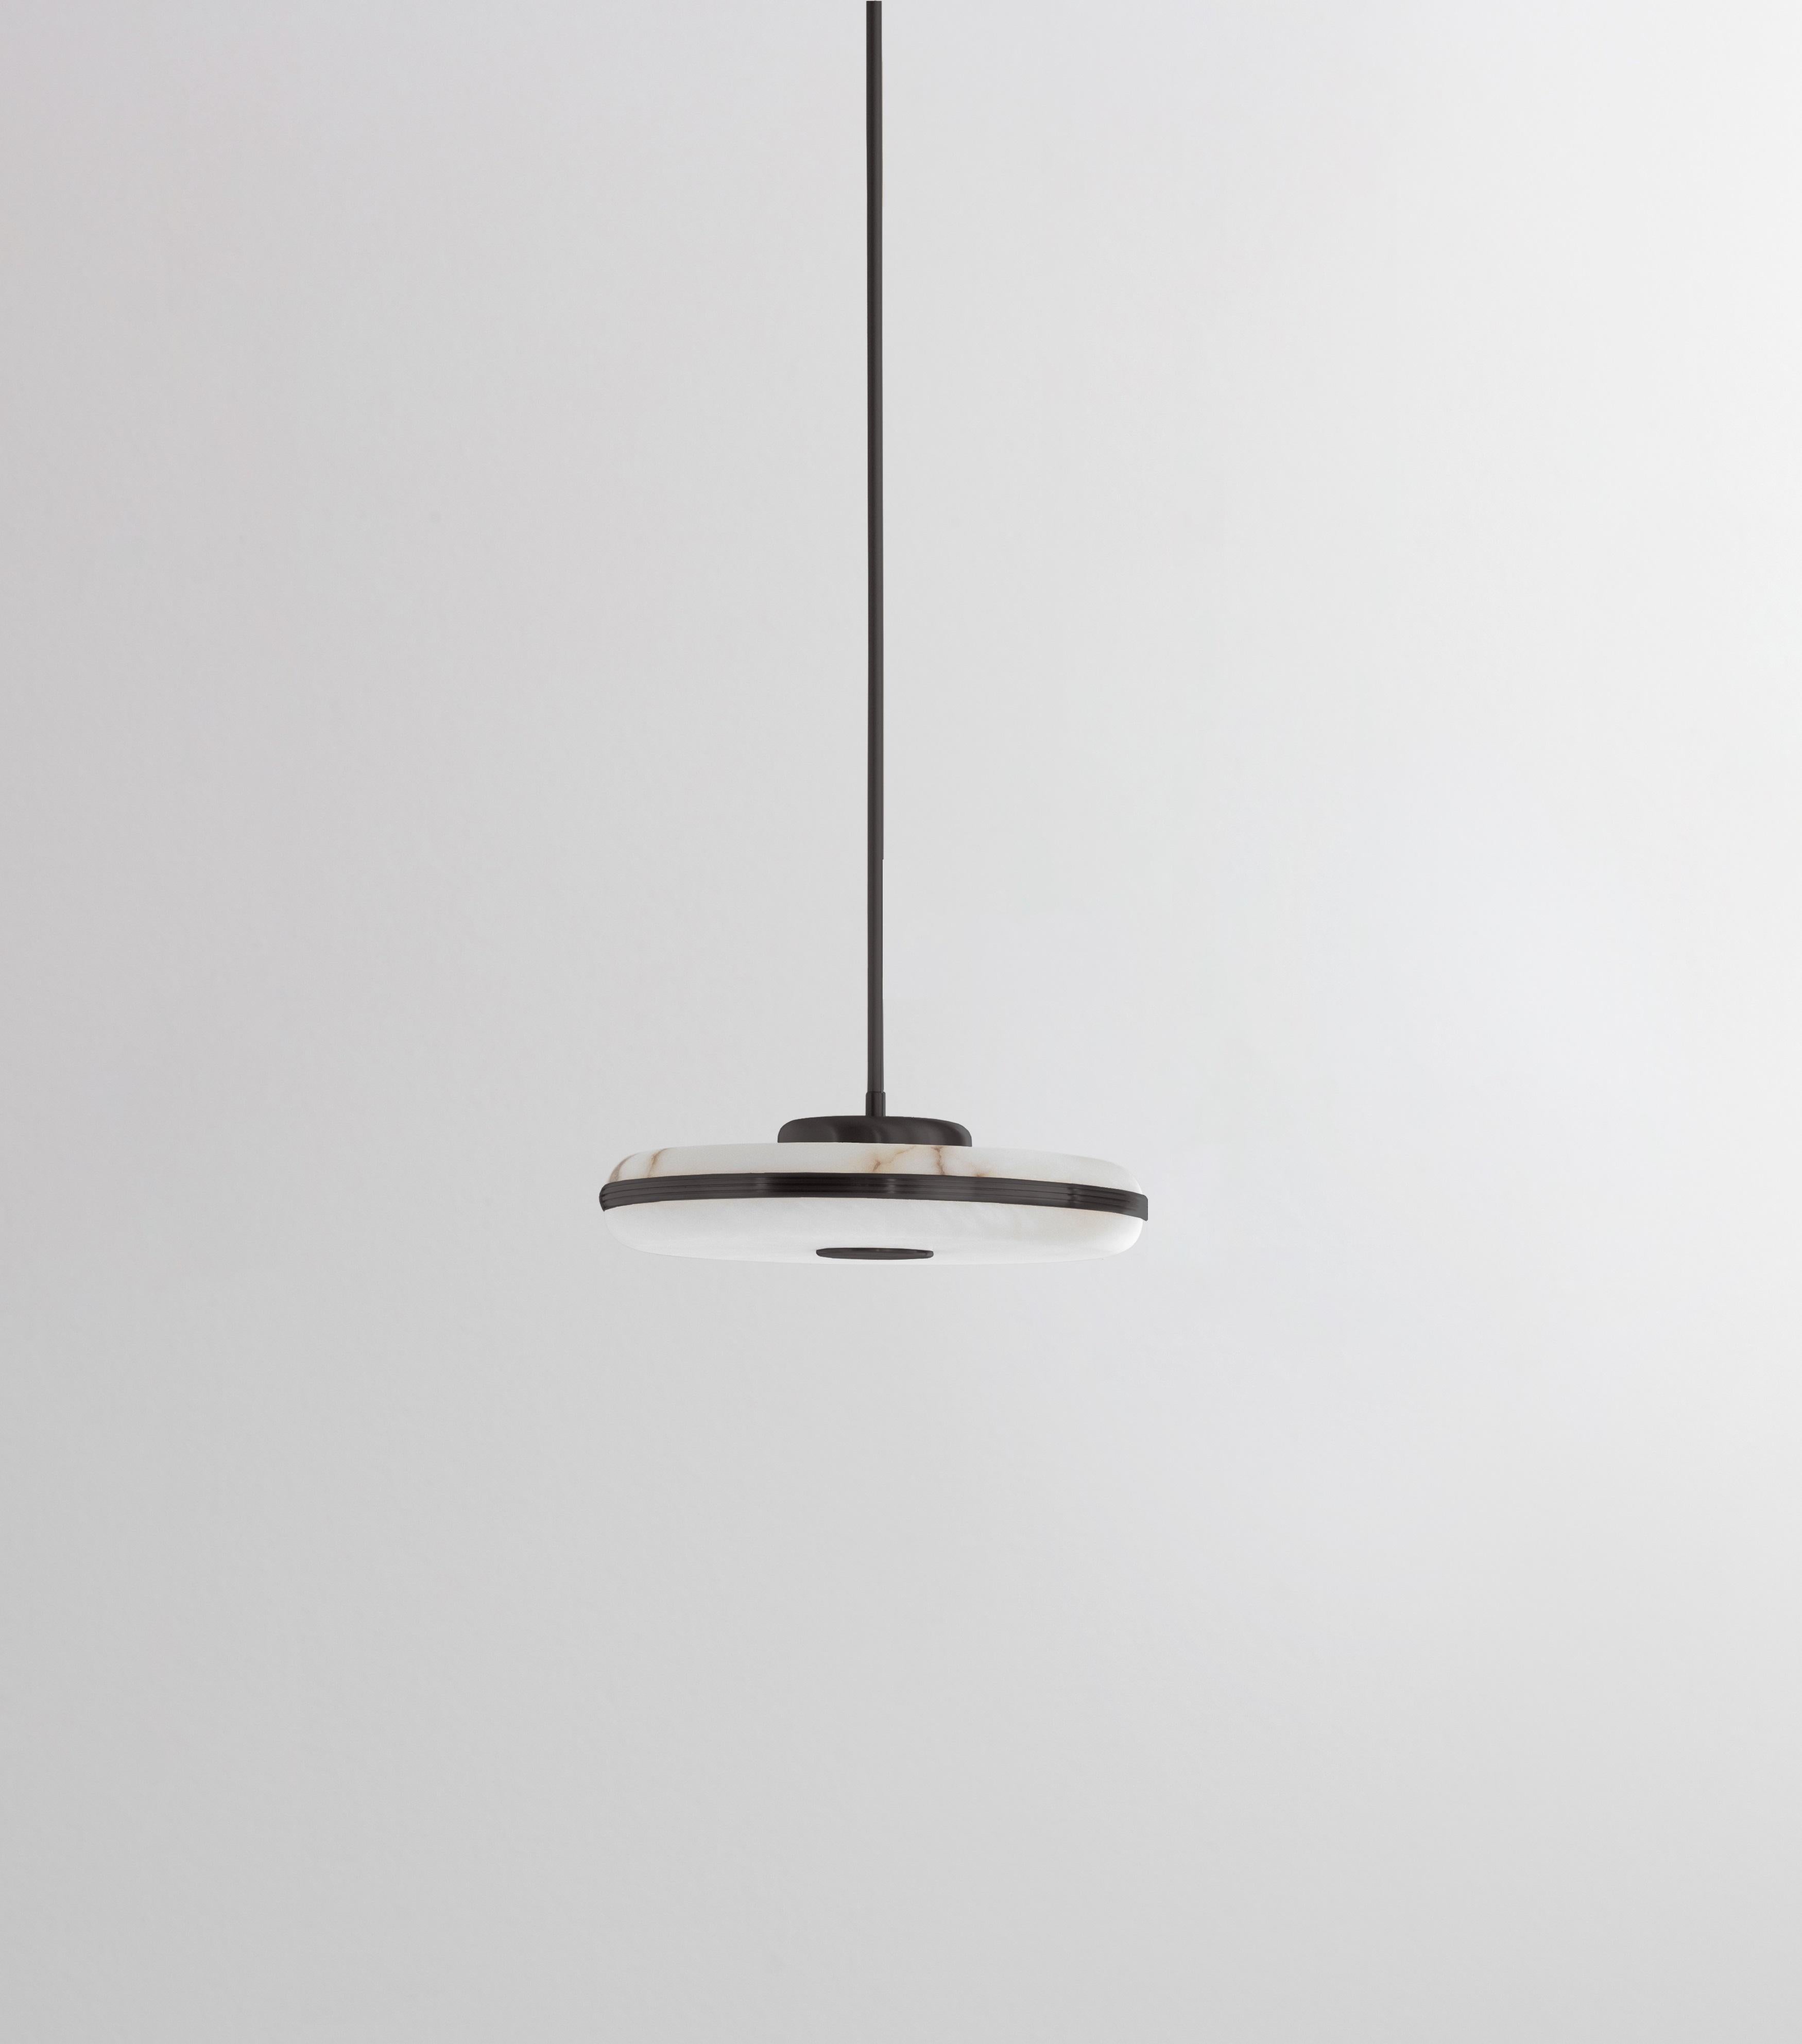 Beran Dark Bronze Large Pendant Lamp by Bert Frank
Dimensions: Ø 36 x H 6 cm. 
Materials: Bronze and alabaster.

Available in two different sizes. Available in different finishes and materials. Height is customized to order. Please contact us. 

The